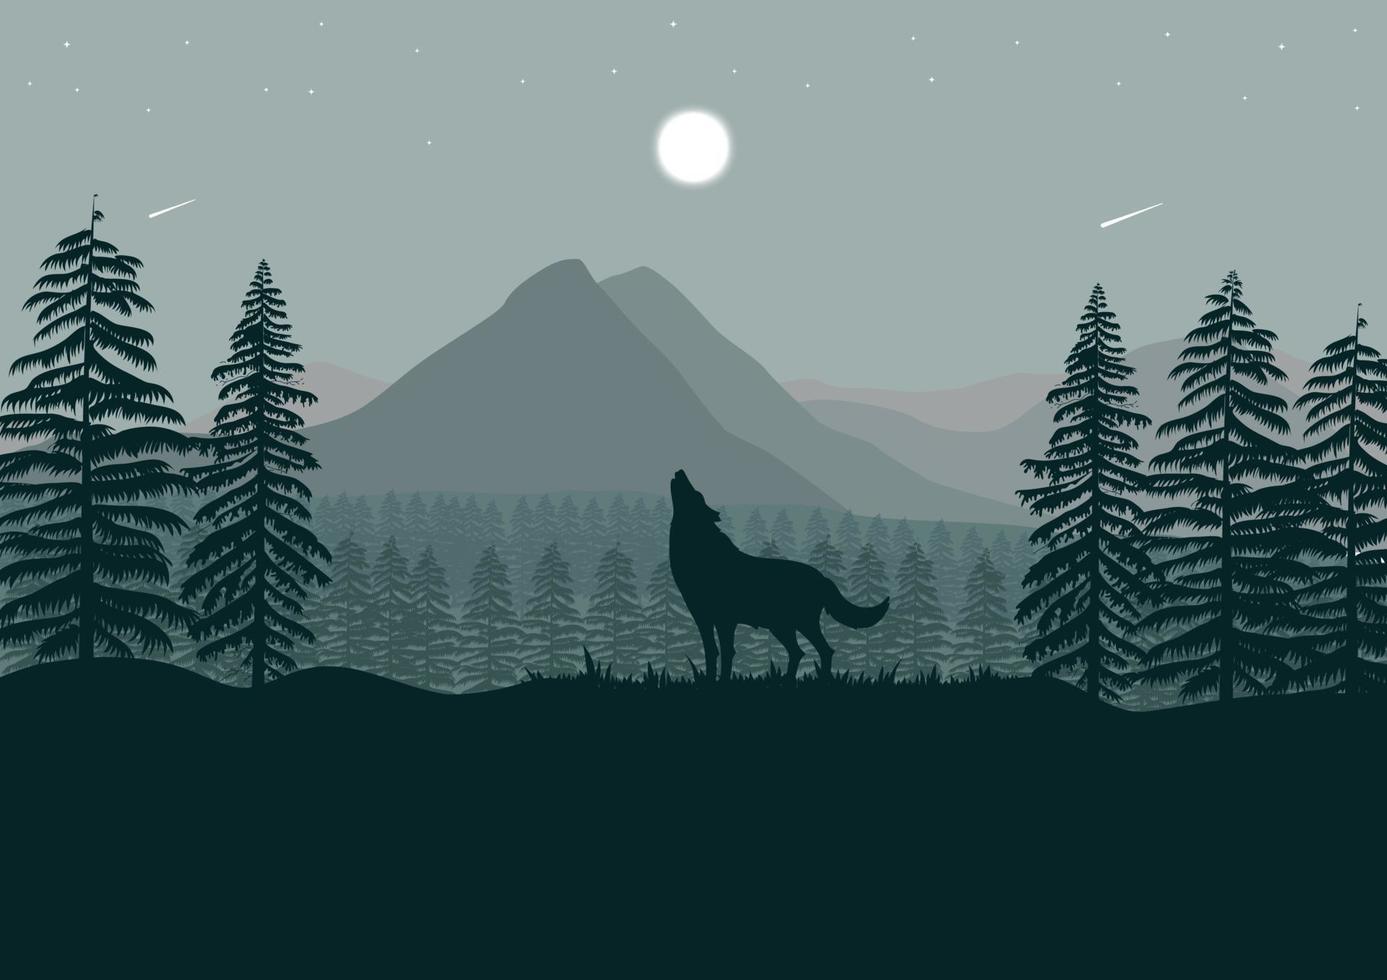 wolf and mountains landscape with full moon at night vector illustration